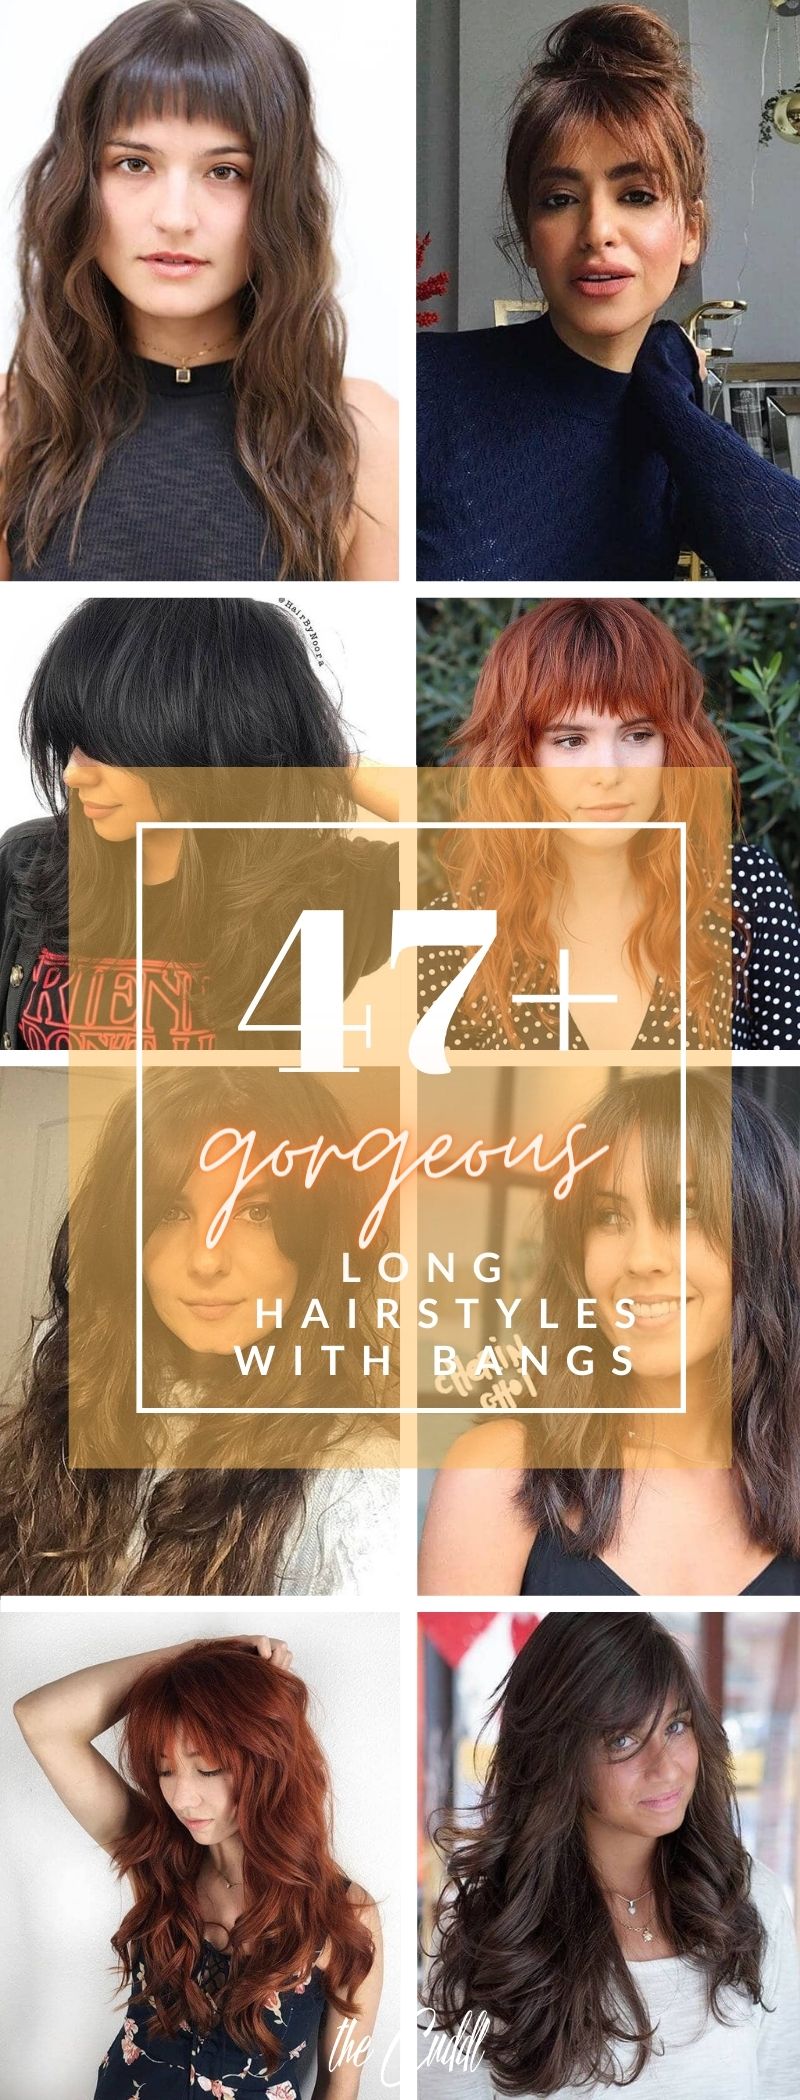 50 Gorgeous Hairstyles That Will Make You Envy Long Hair With Bangs